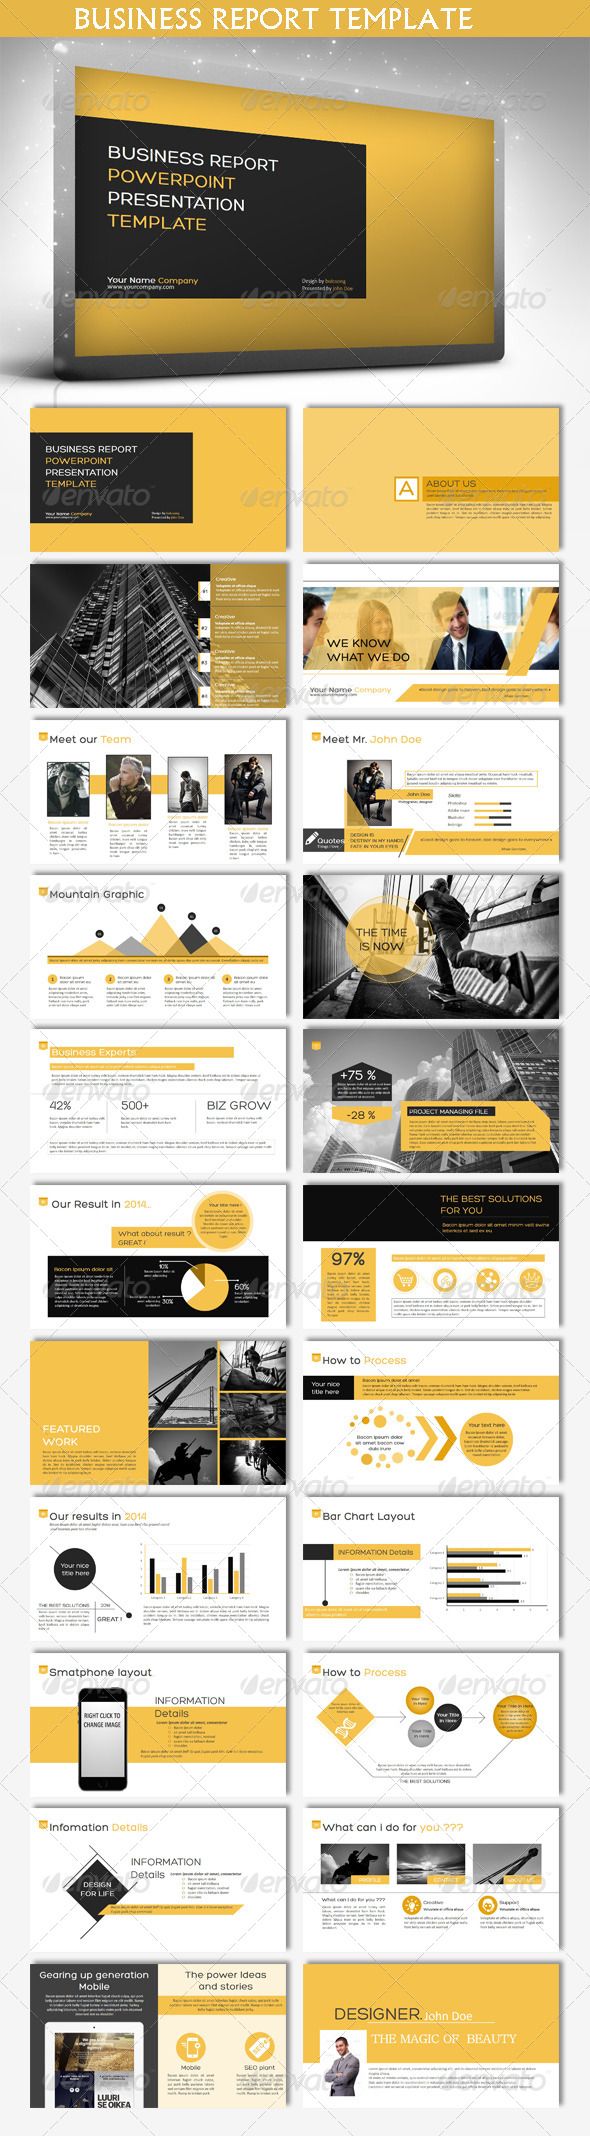 Business Report Powerpoint Template (Powerpoint Templates) #Powerpoint #Powerpoi